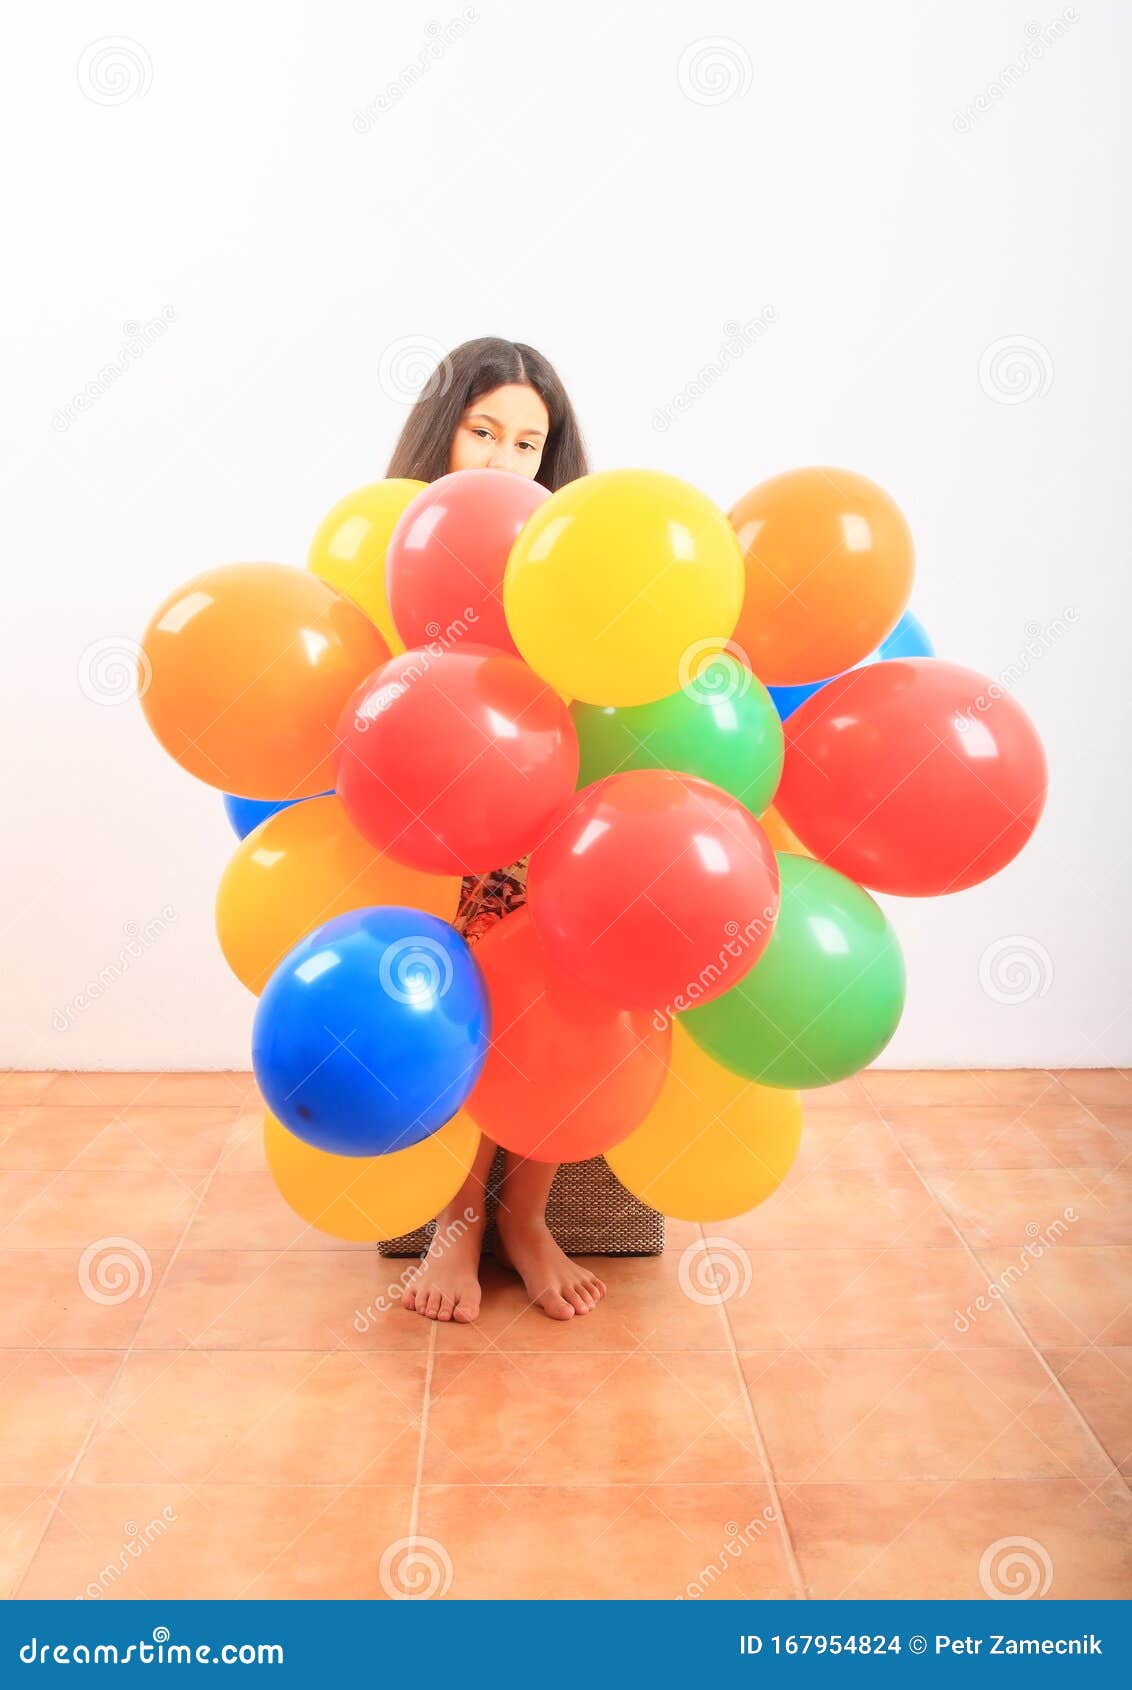 Girl behind inflating balloons. Barefoot girl - teenage kid sitting behind colorful inflated balloons. Childhood concept.